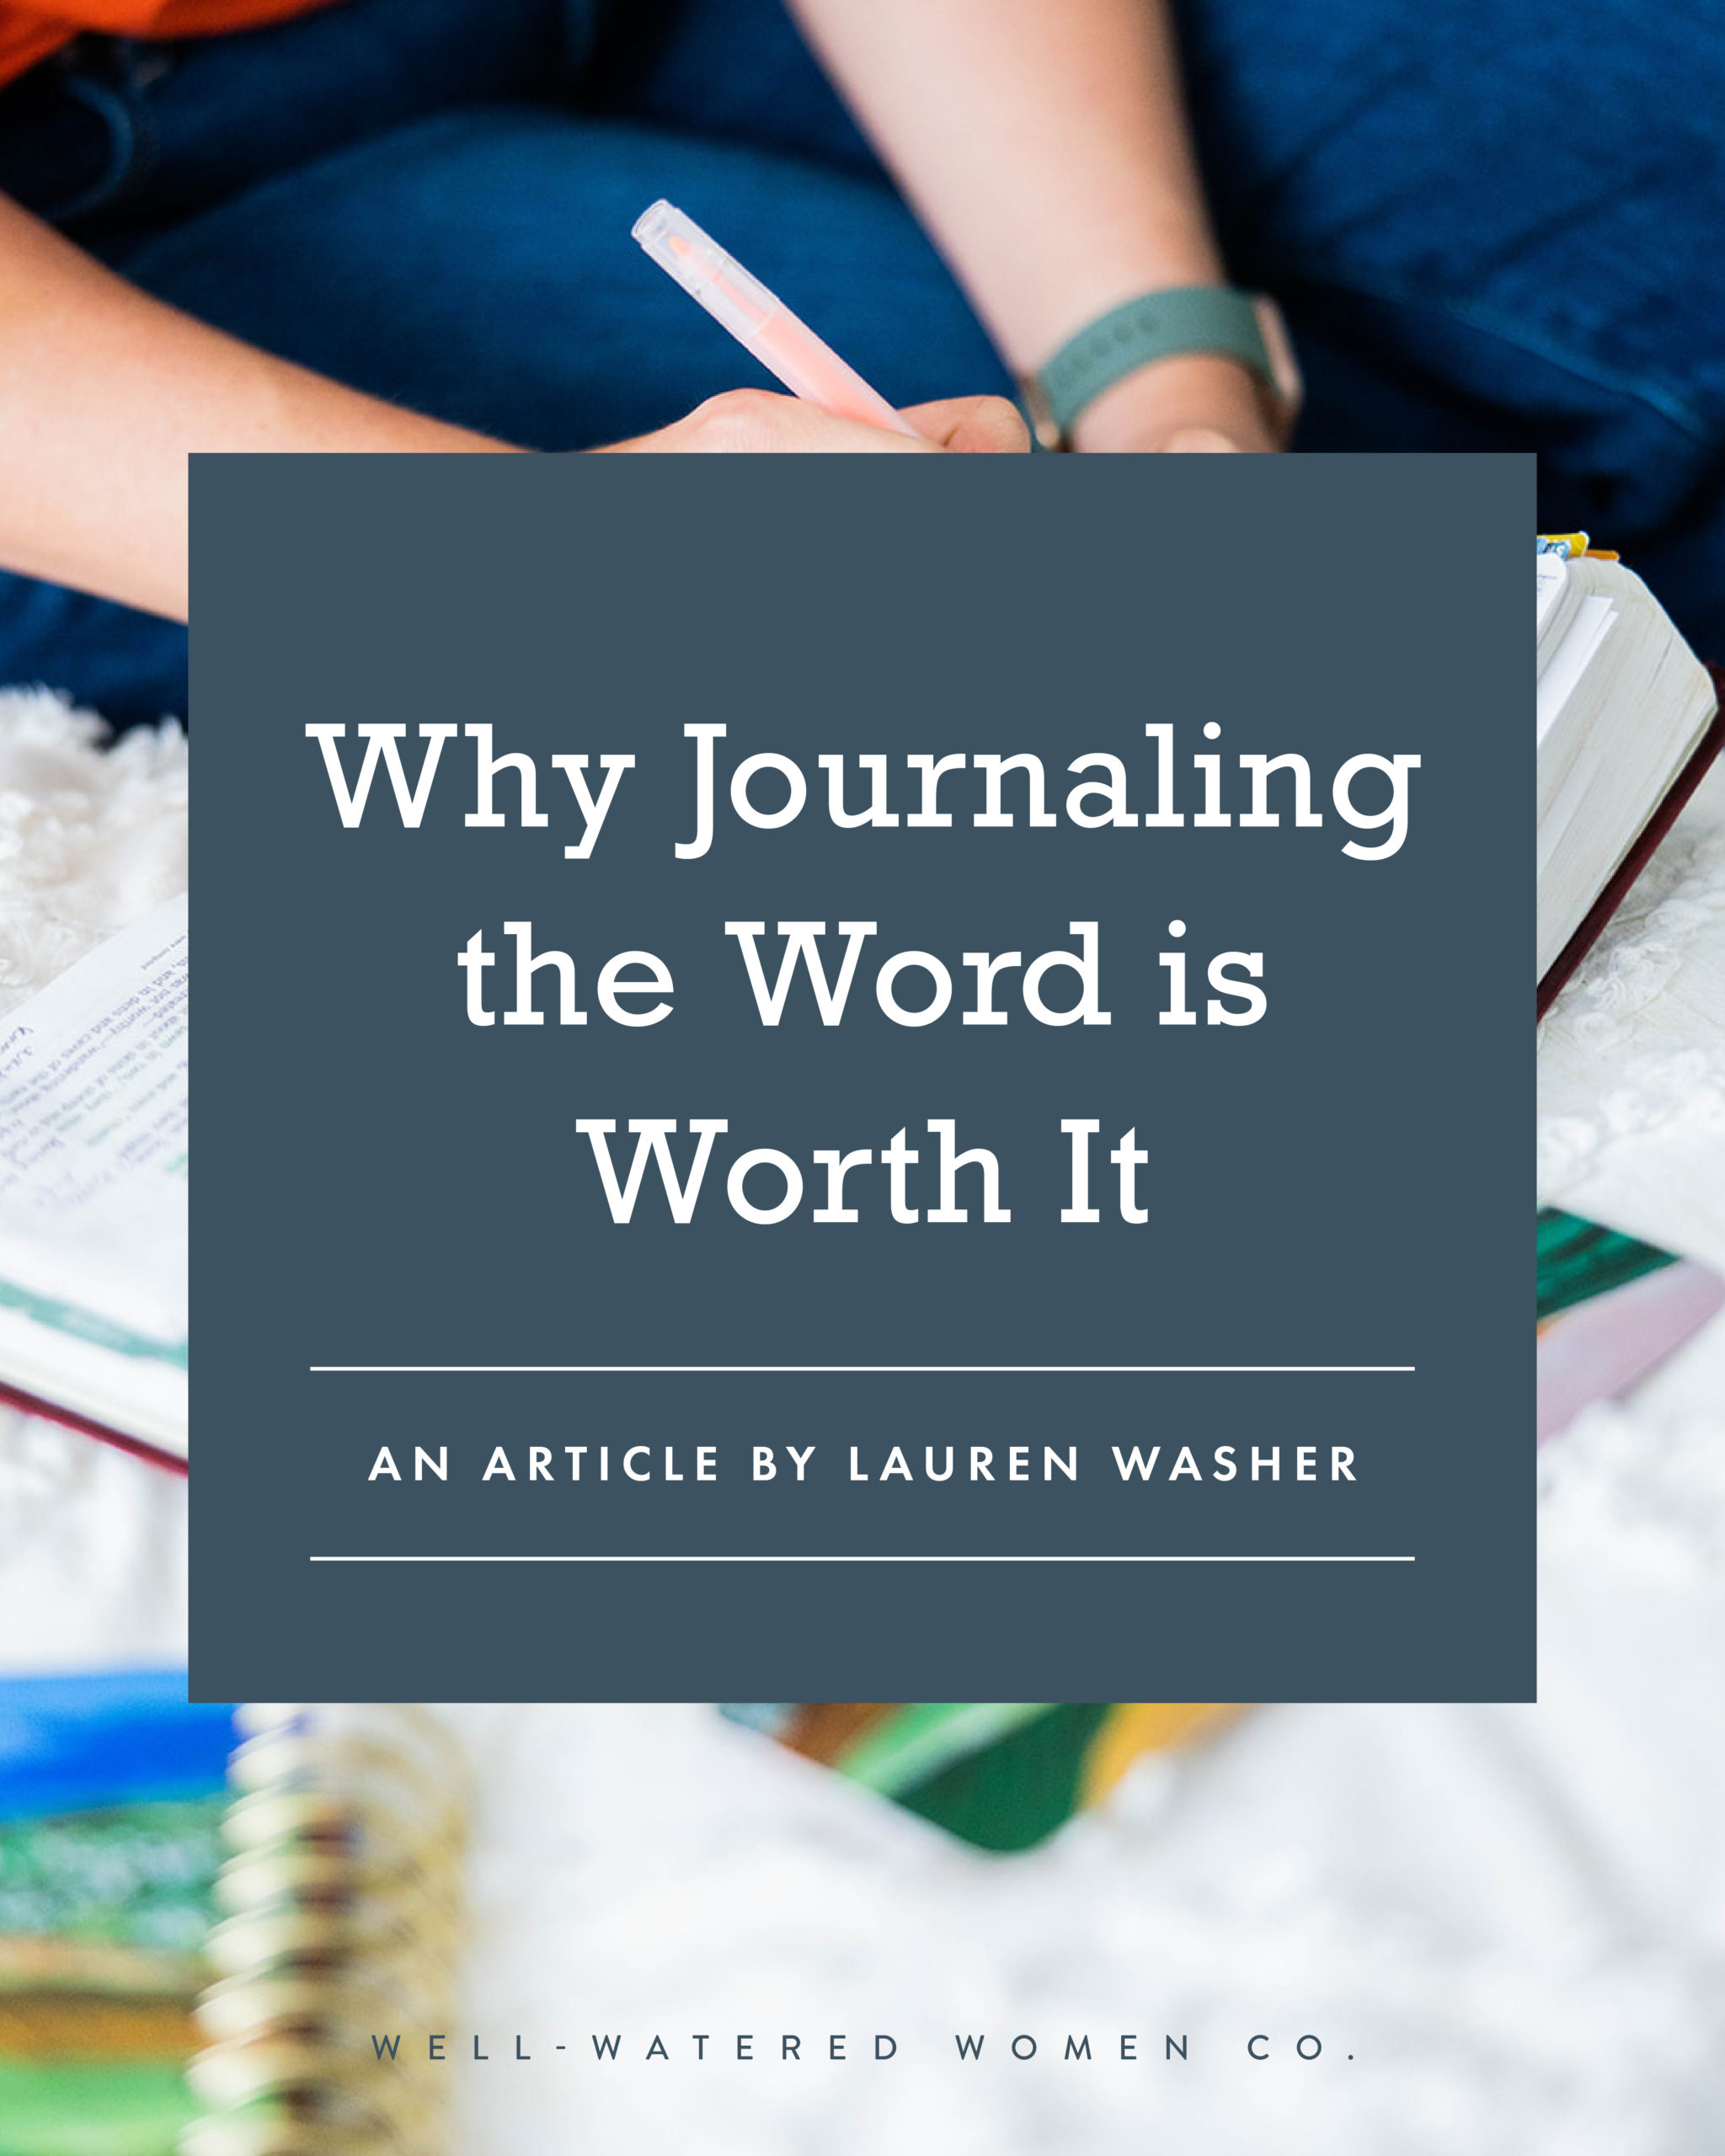 Why Journaling the Word is Worth It - an article from Well-Watered Women